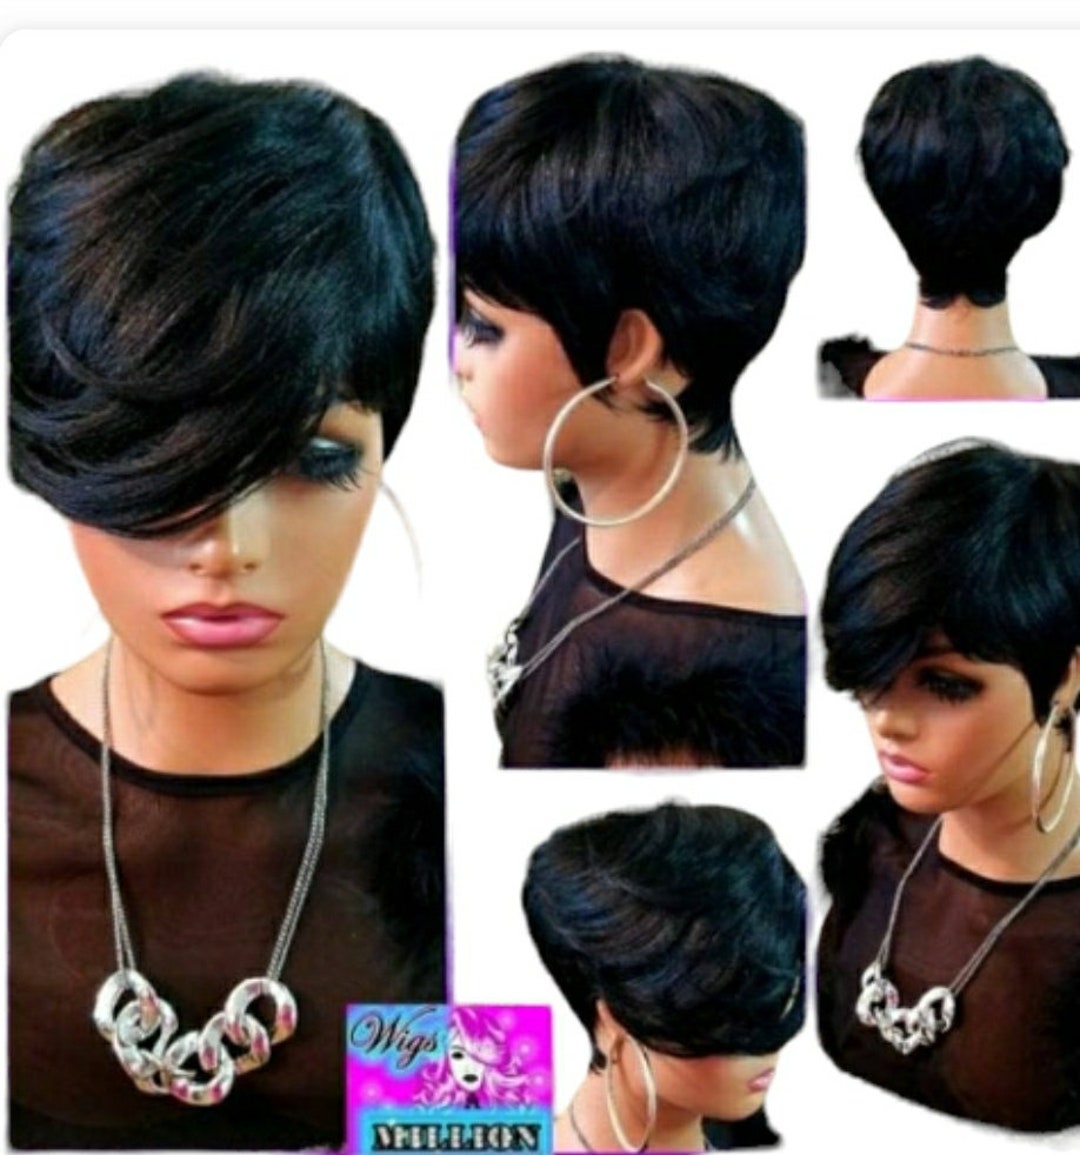 Alexy'' Black Short Pixie Layered Cut With Swoop Bang Synthetic Wig Wig,  Full Cap Wig, Black Wig, Full Cap Hair Loss, Alopeica, Chemo Wig, 